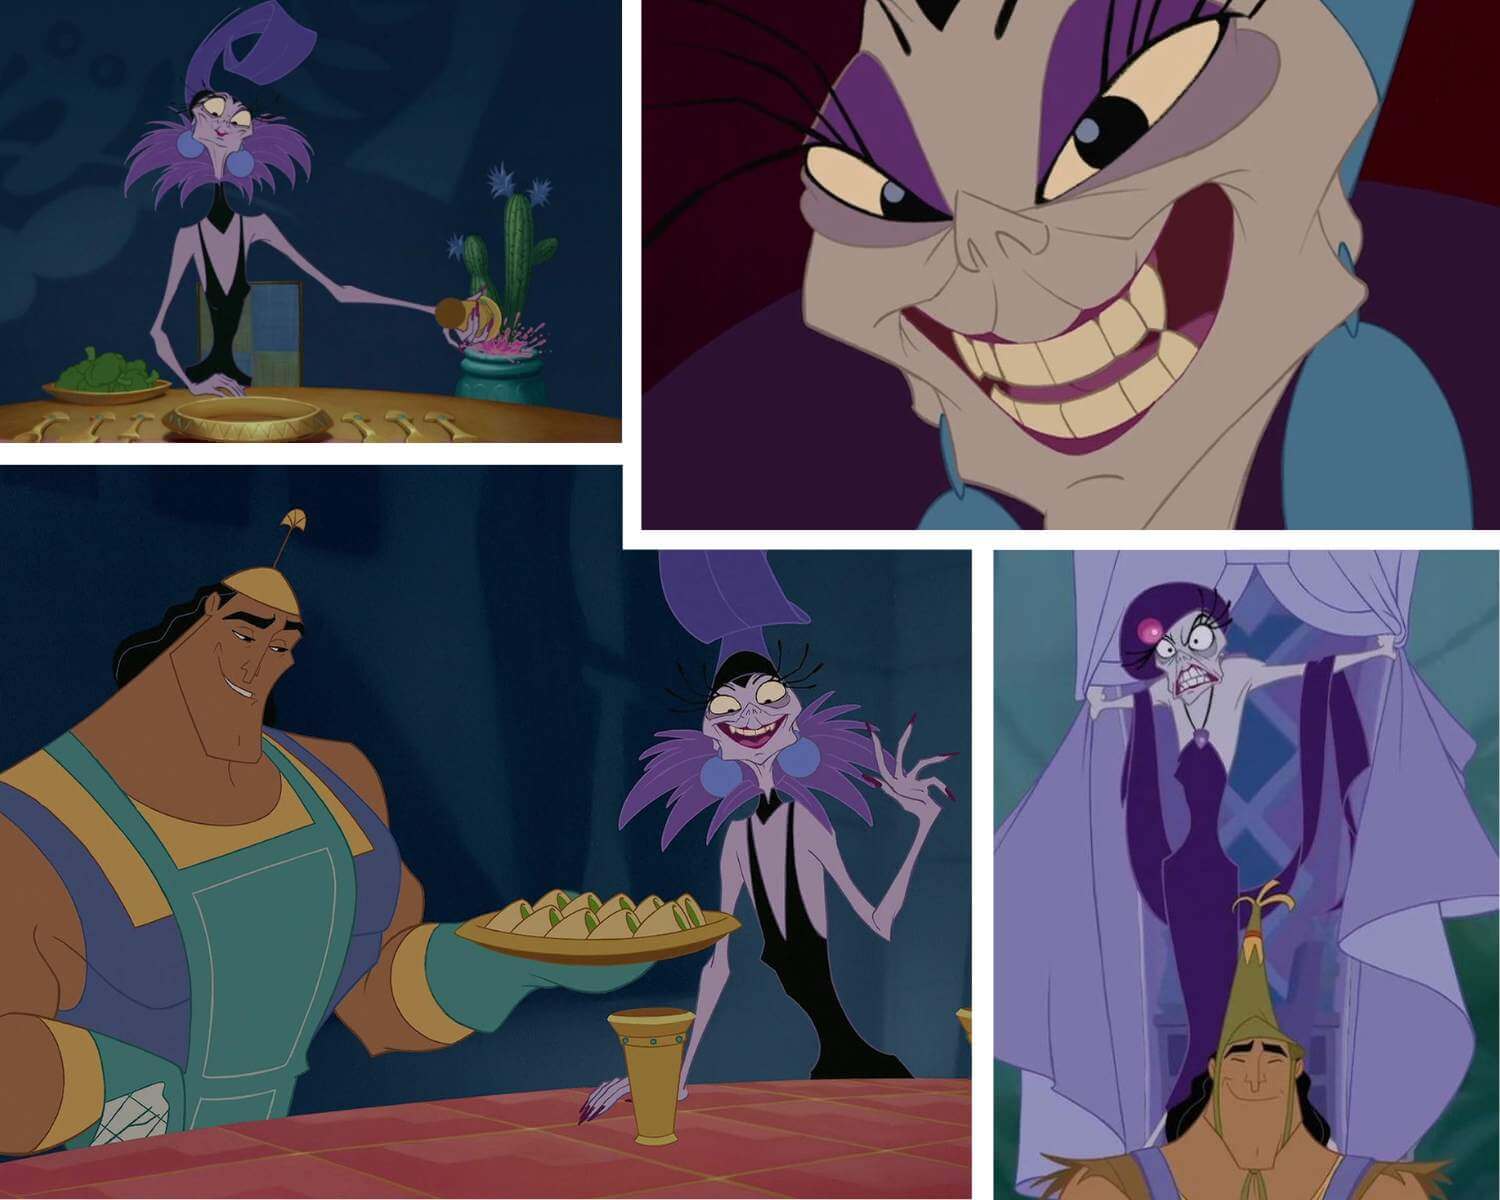 Yzma The Main Villain in The Emperor's New Groove